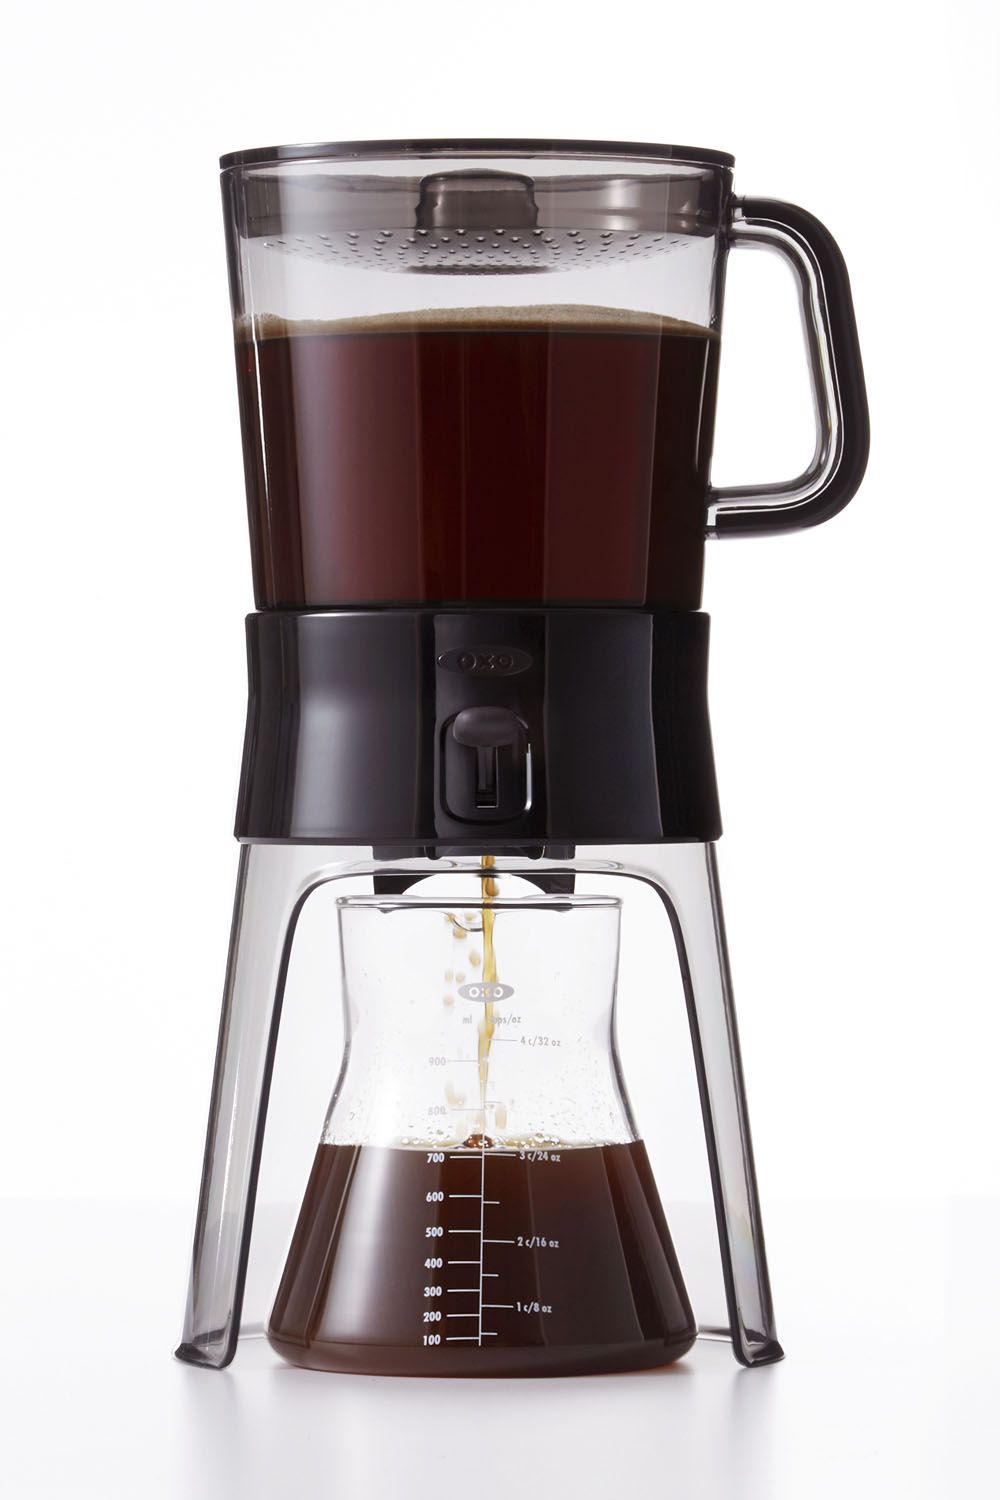 Oxo Cold Brew Coffee Maker Review - Cold Brewing Coffee at Home